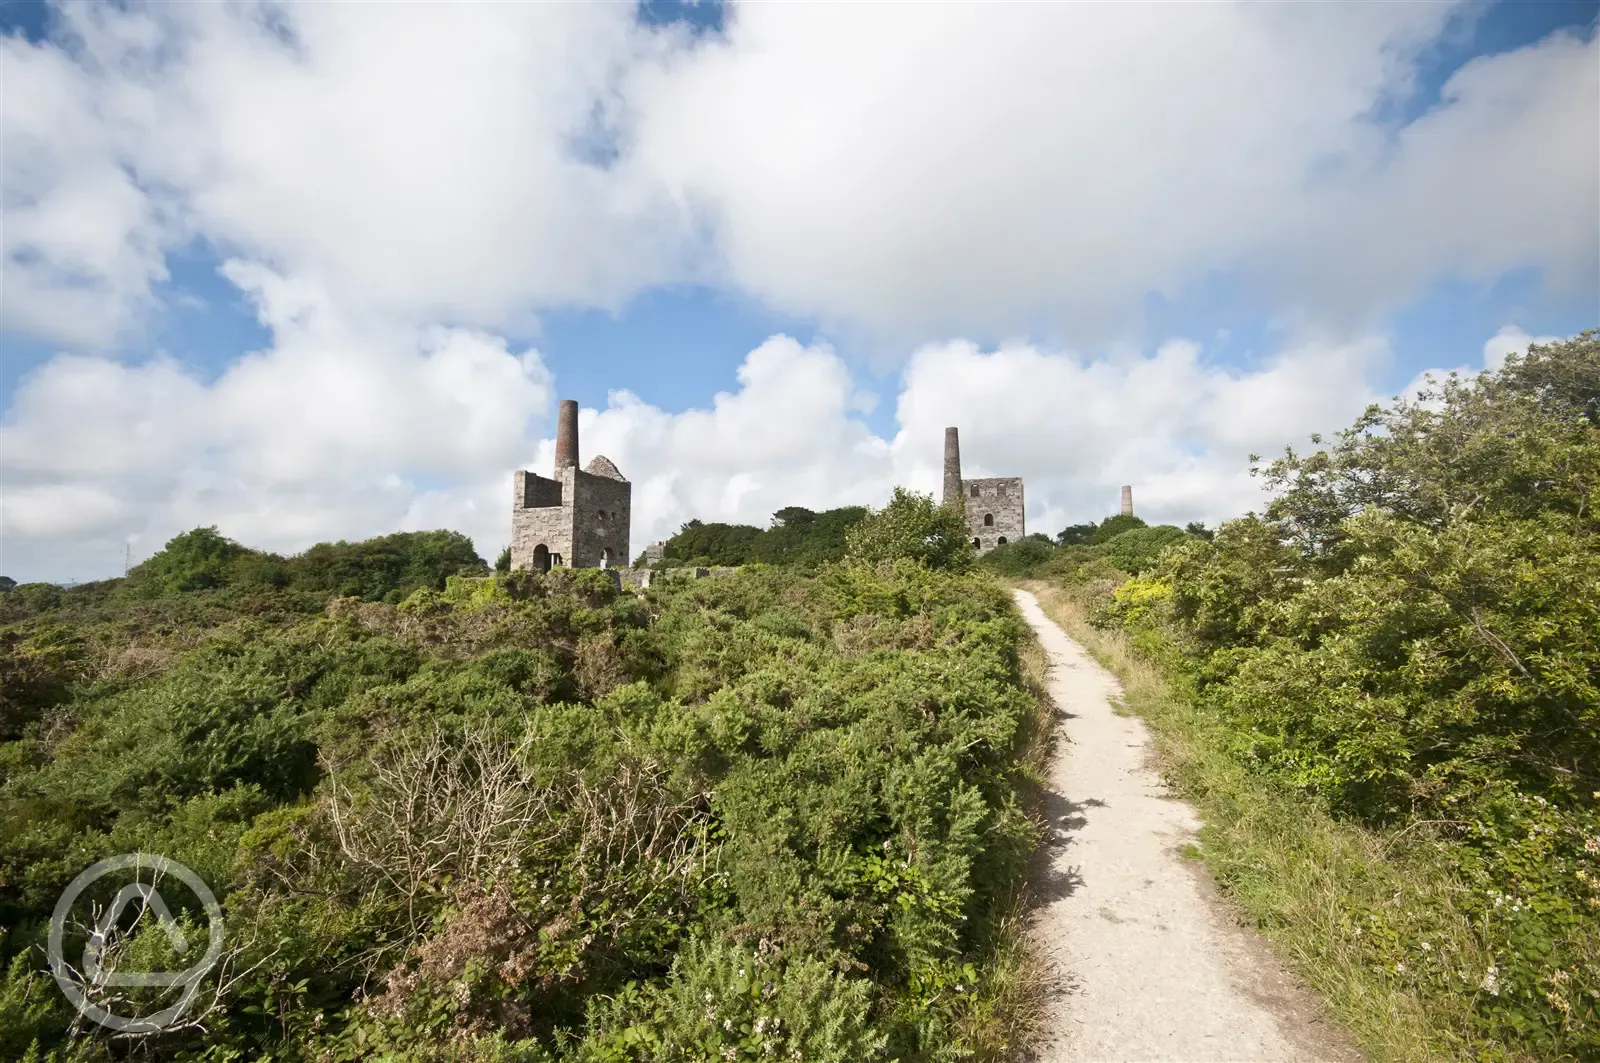 Footpath at Wheal Peevor, just 5 minutes walk from the park